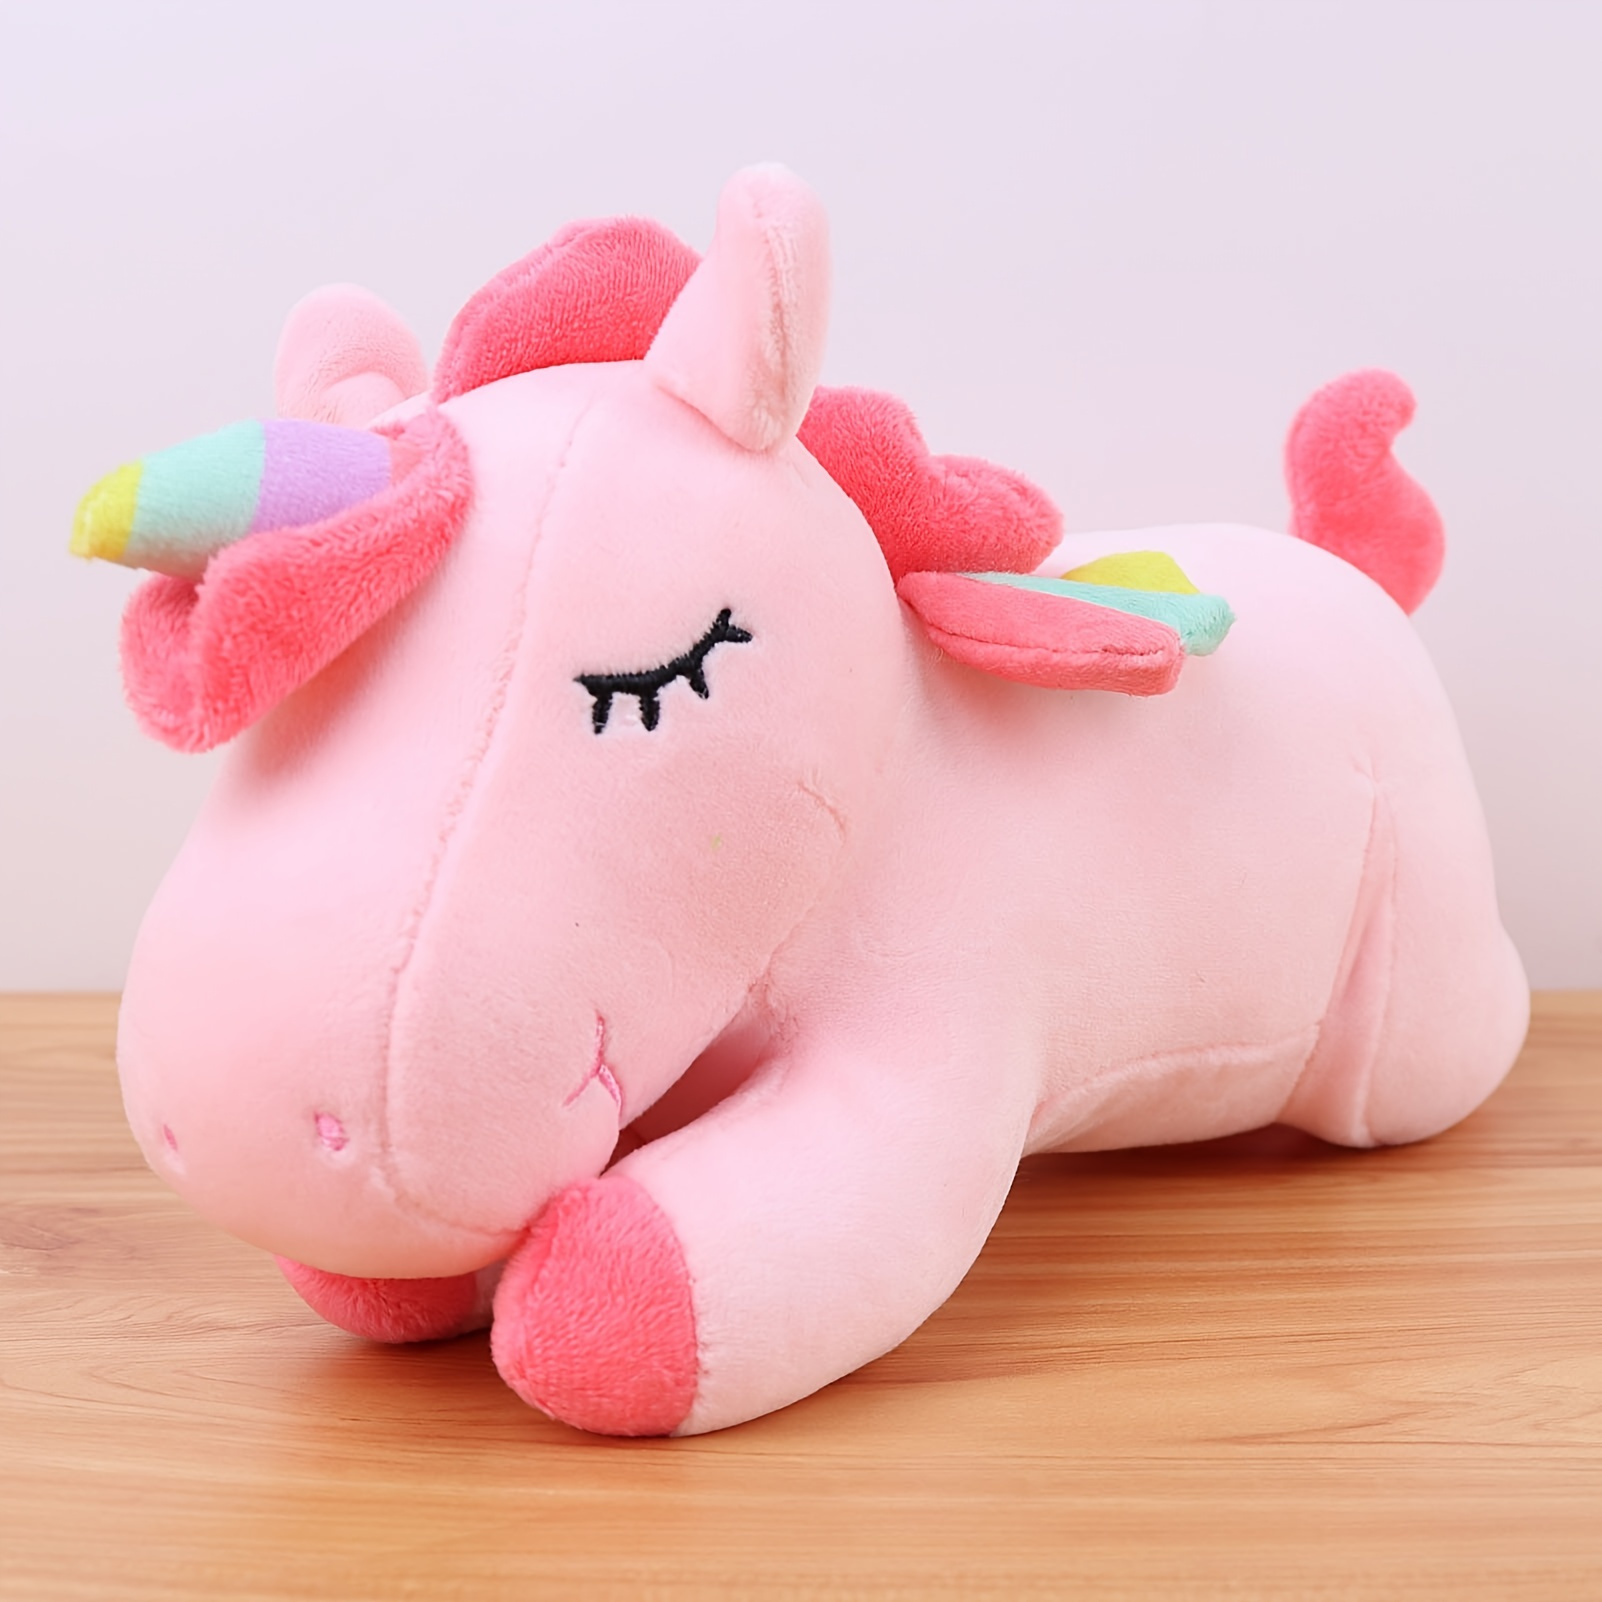 

25cm/9.84in Soft Unicorn Plush Toy, Appease Sleeping Pillow Doll, Animal Stuffed Plush Toy, Birthday Gifts For Christmas Gift Christmas 、halloween 、thanksgiving Gifts